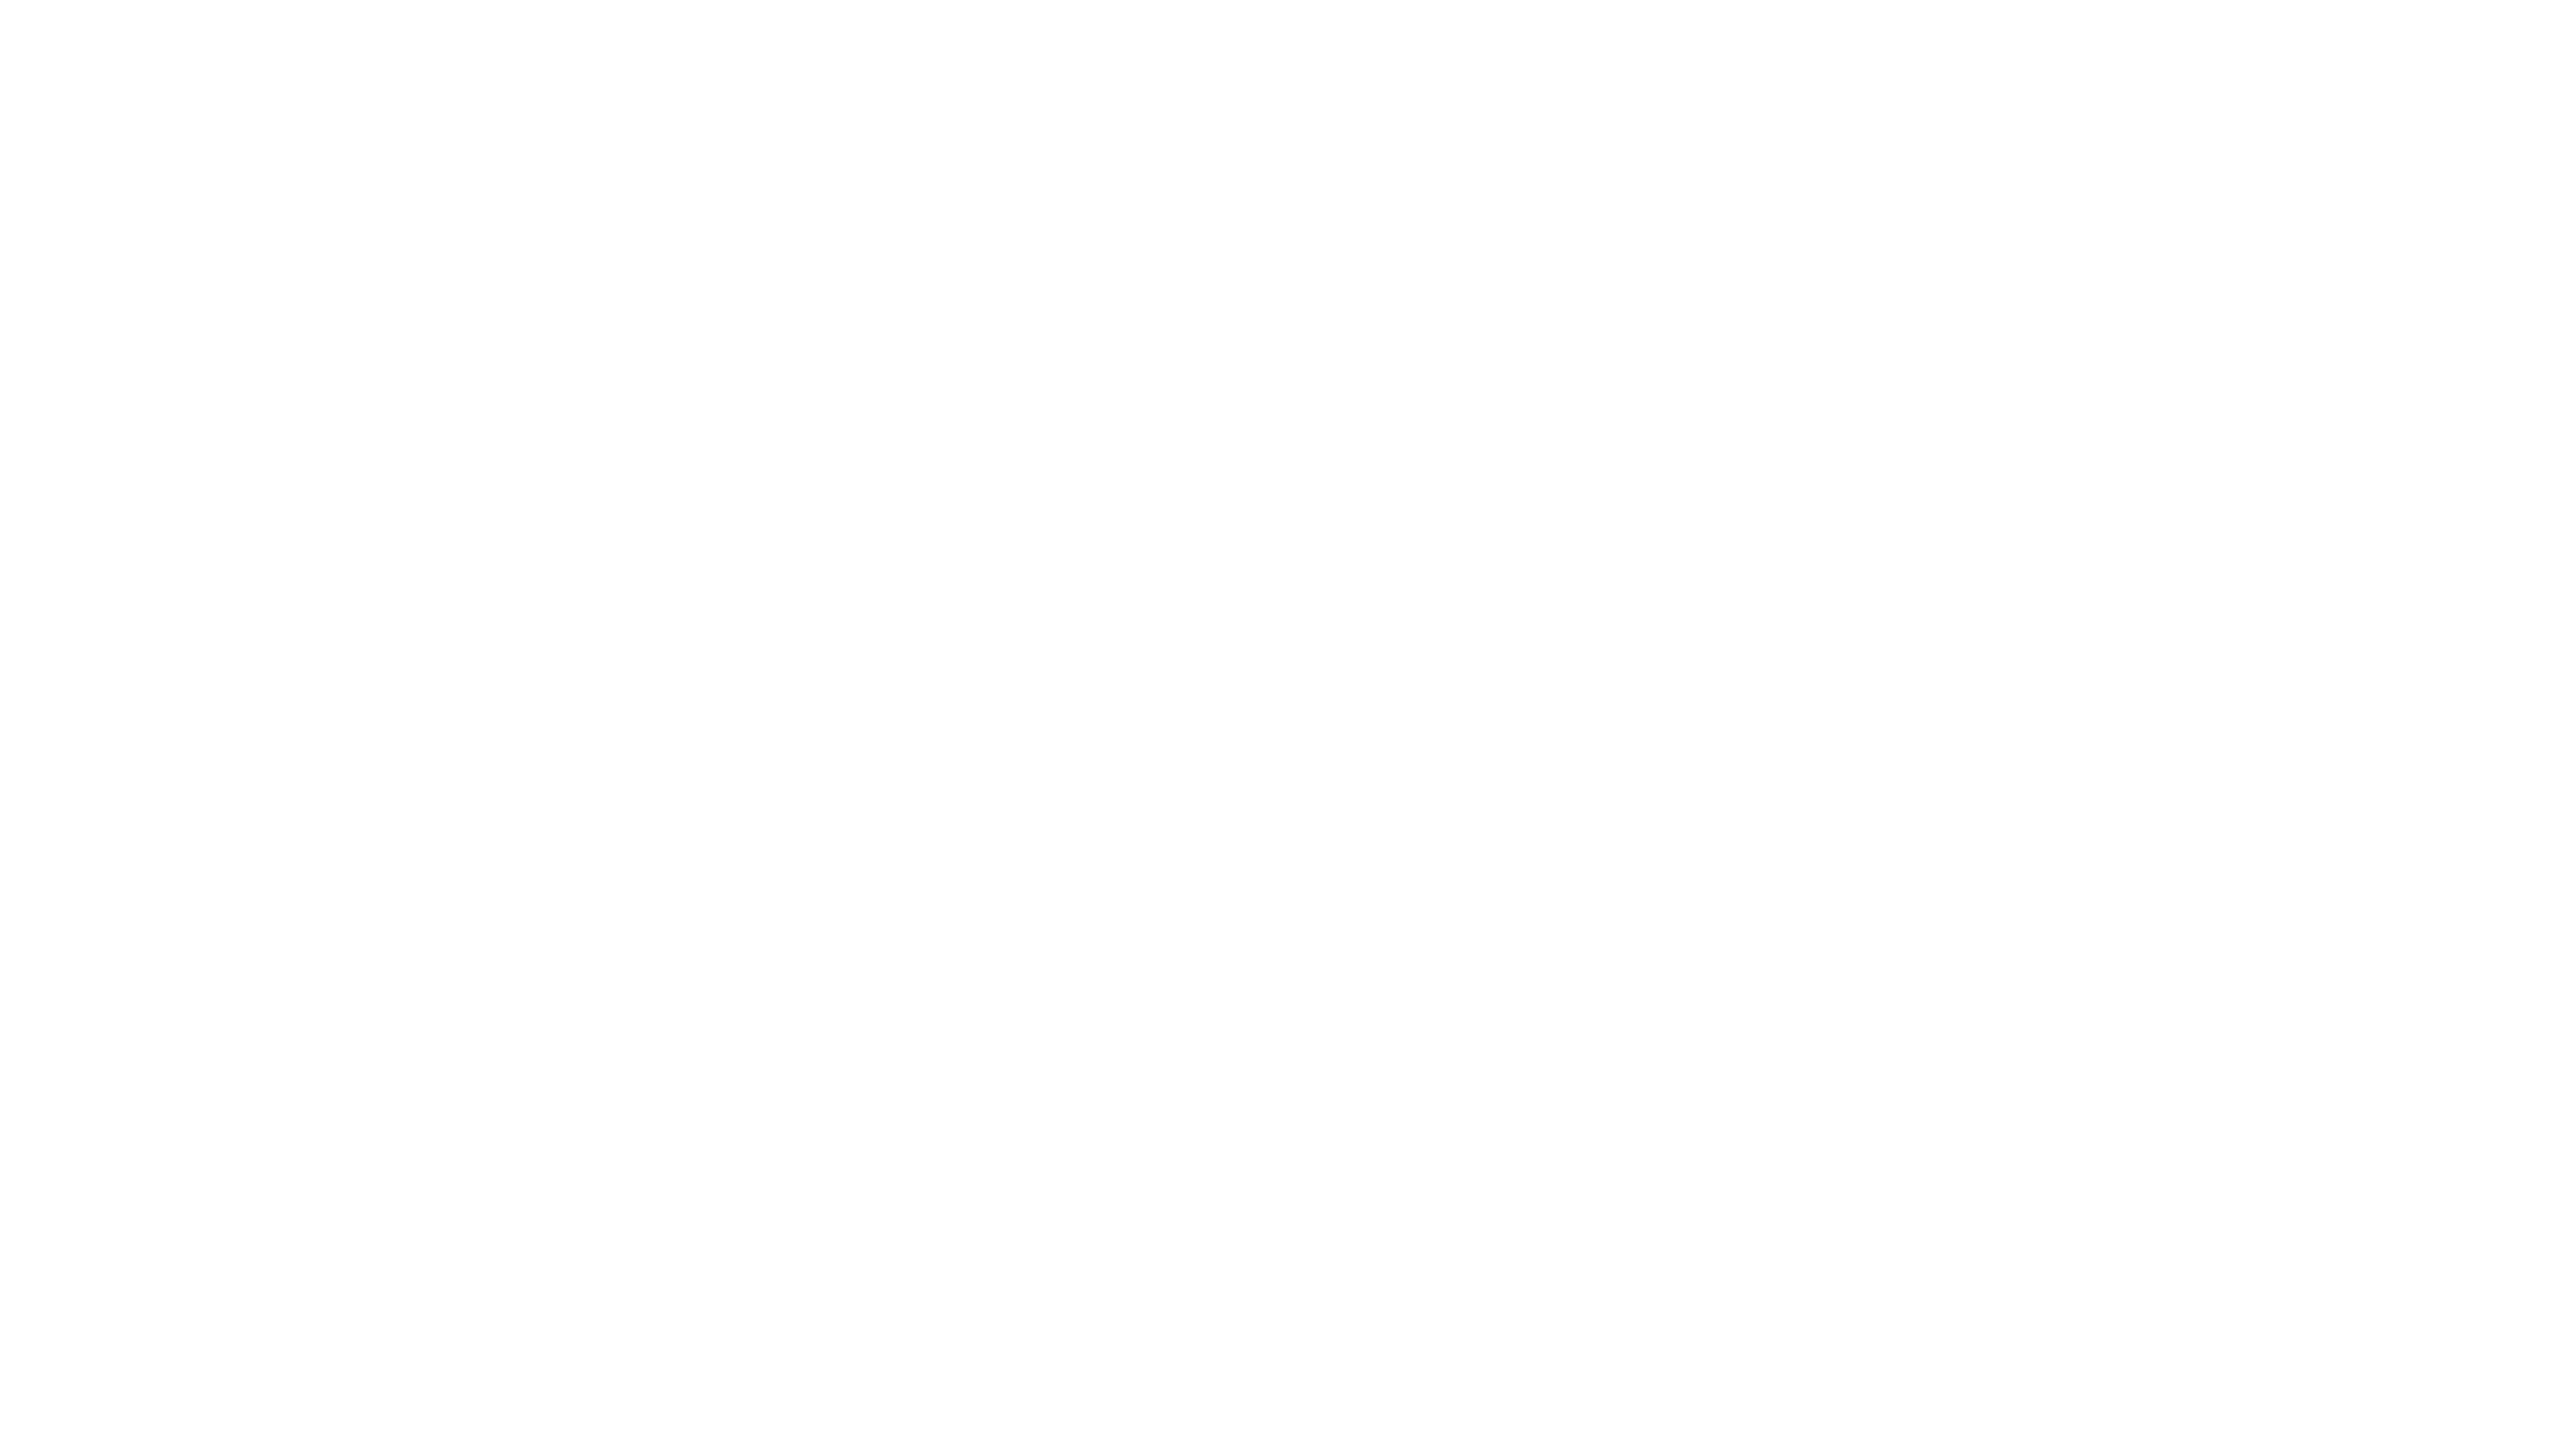 Focused on What Matters